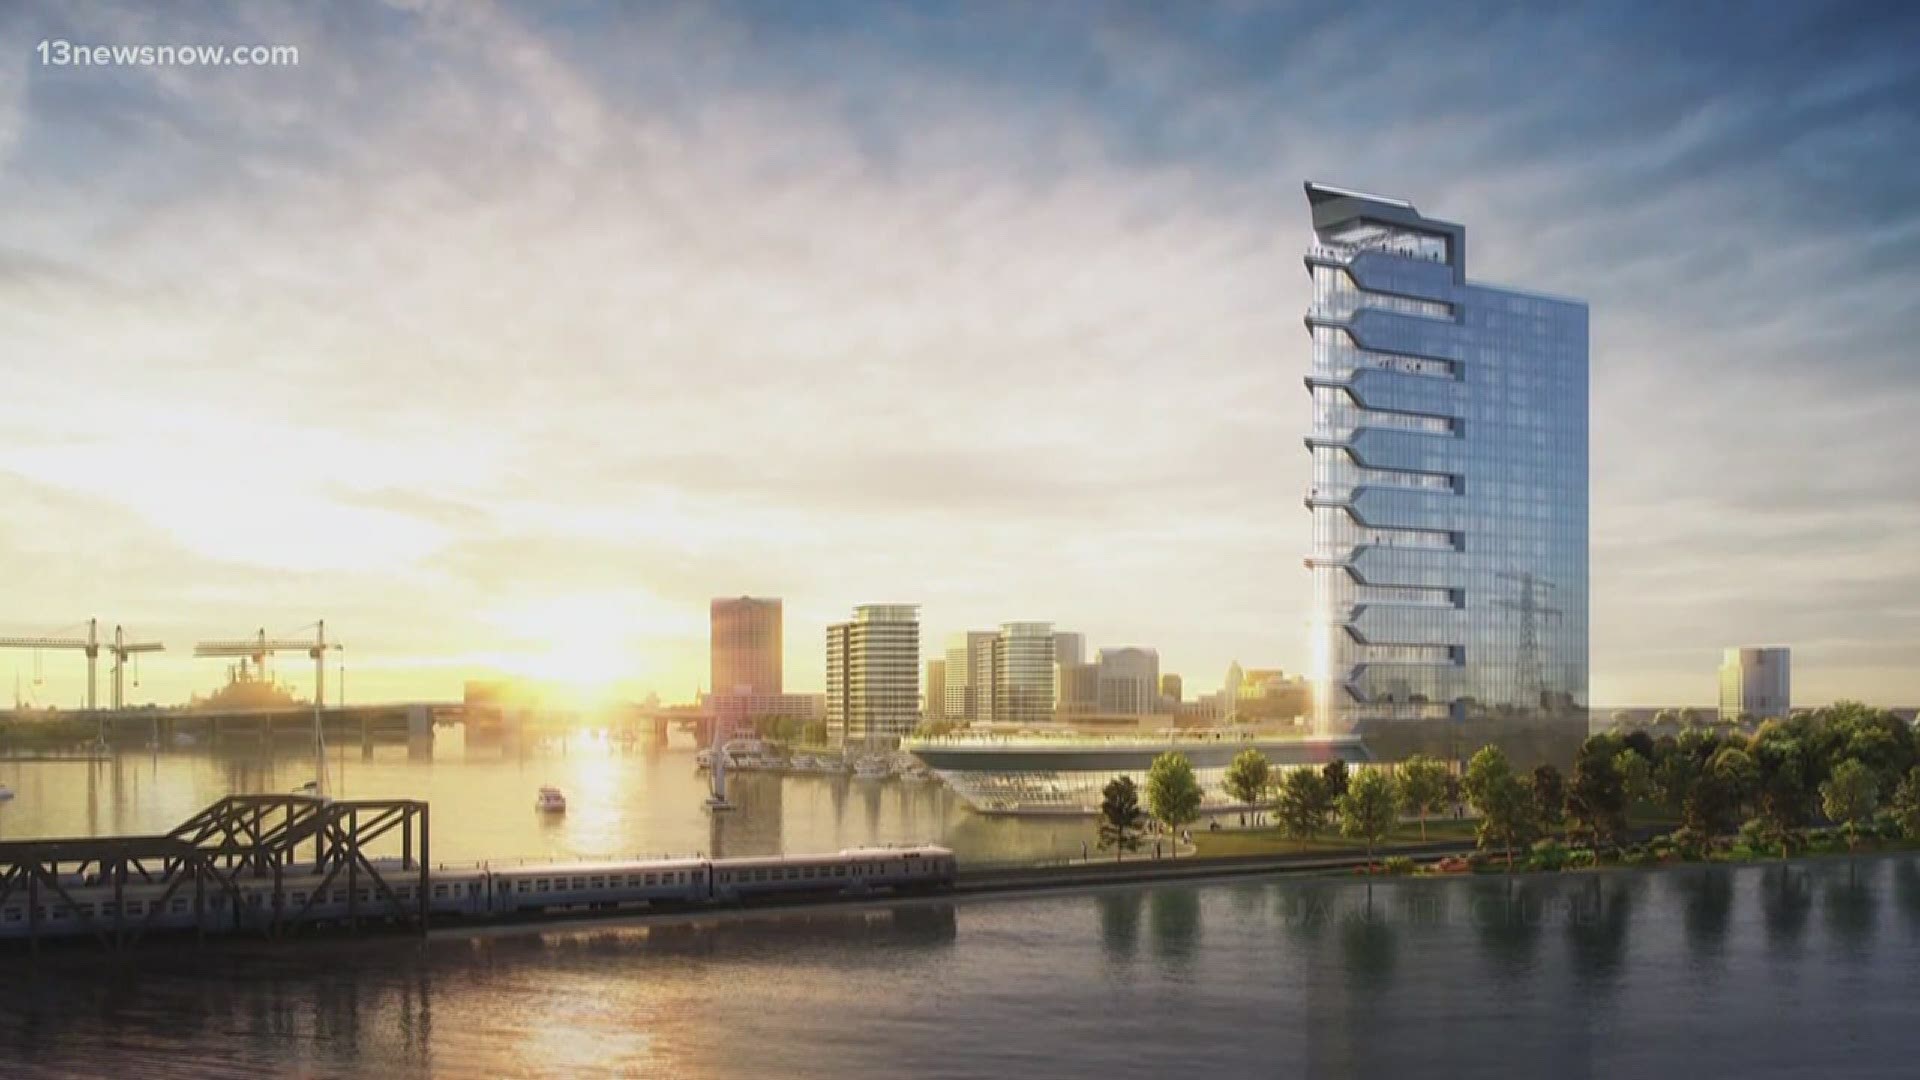 On Tuesday night, Norfolk city leaders reaffirmed their decision to allow the Pamunkey Indian Tribe to develop a waterfront casino, but there are changes involved.